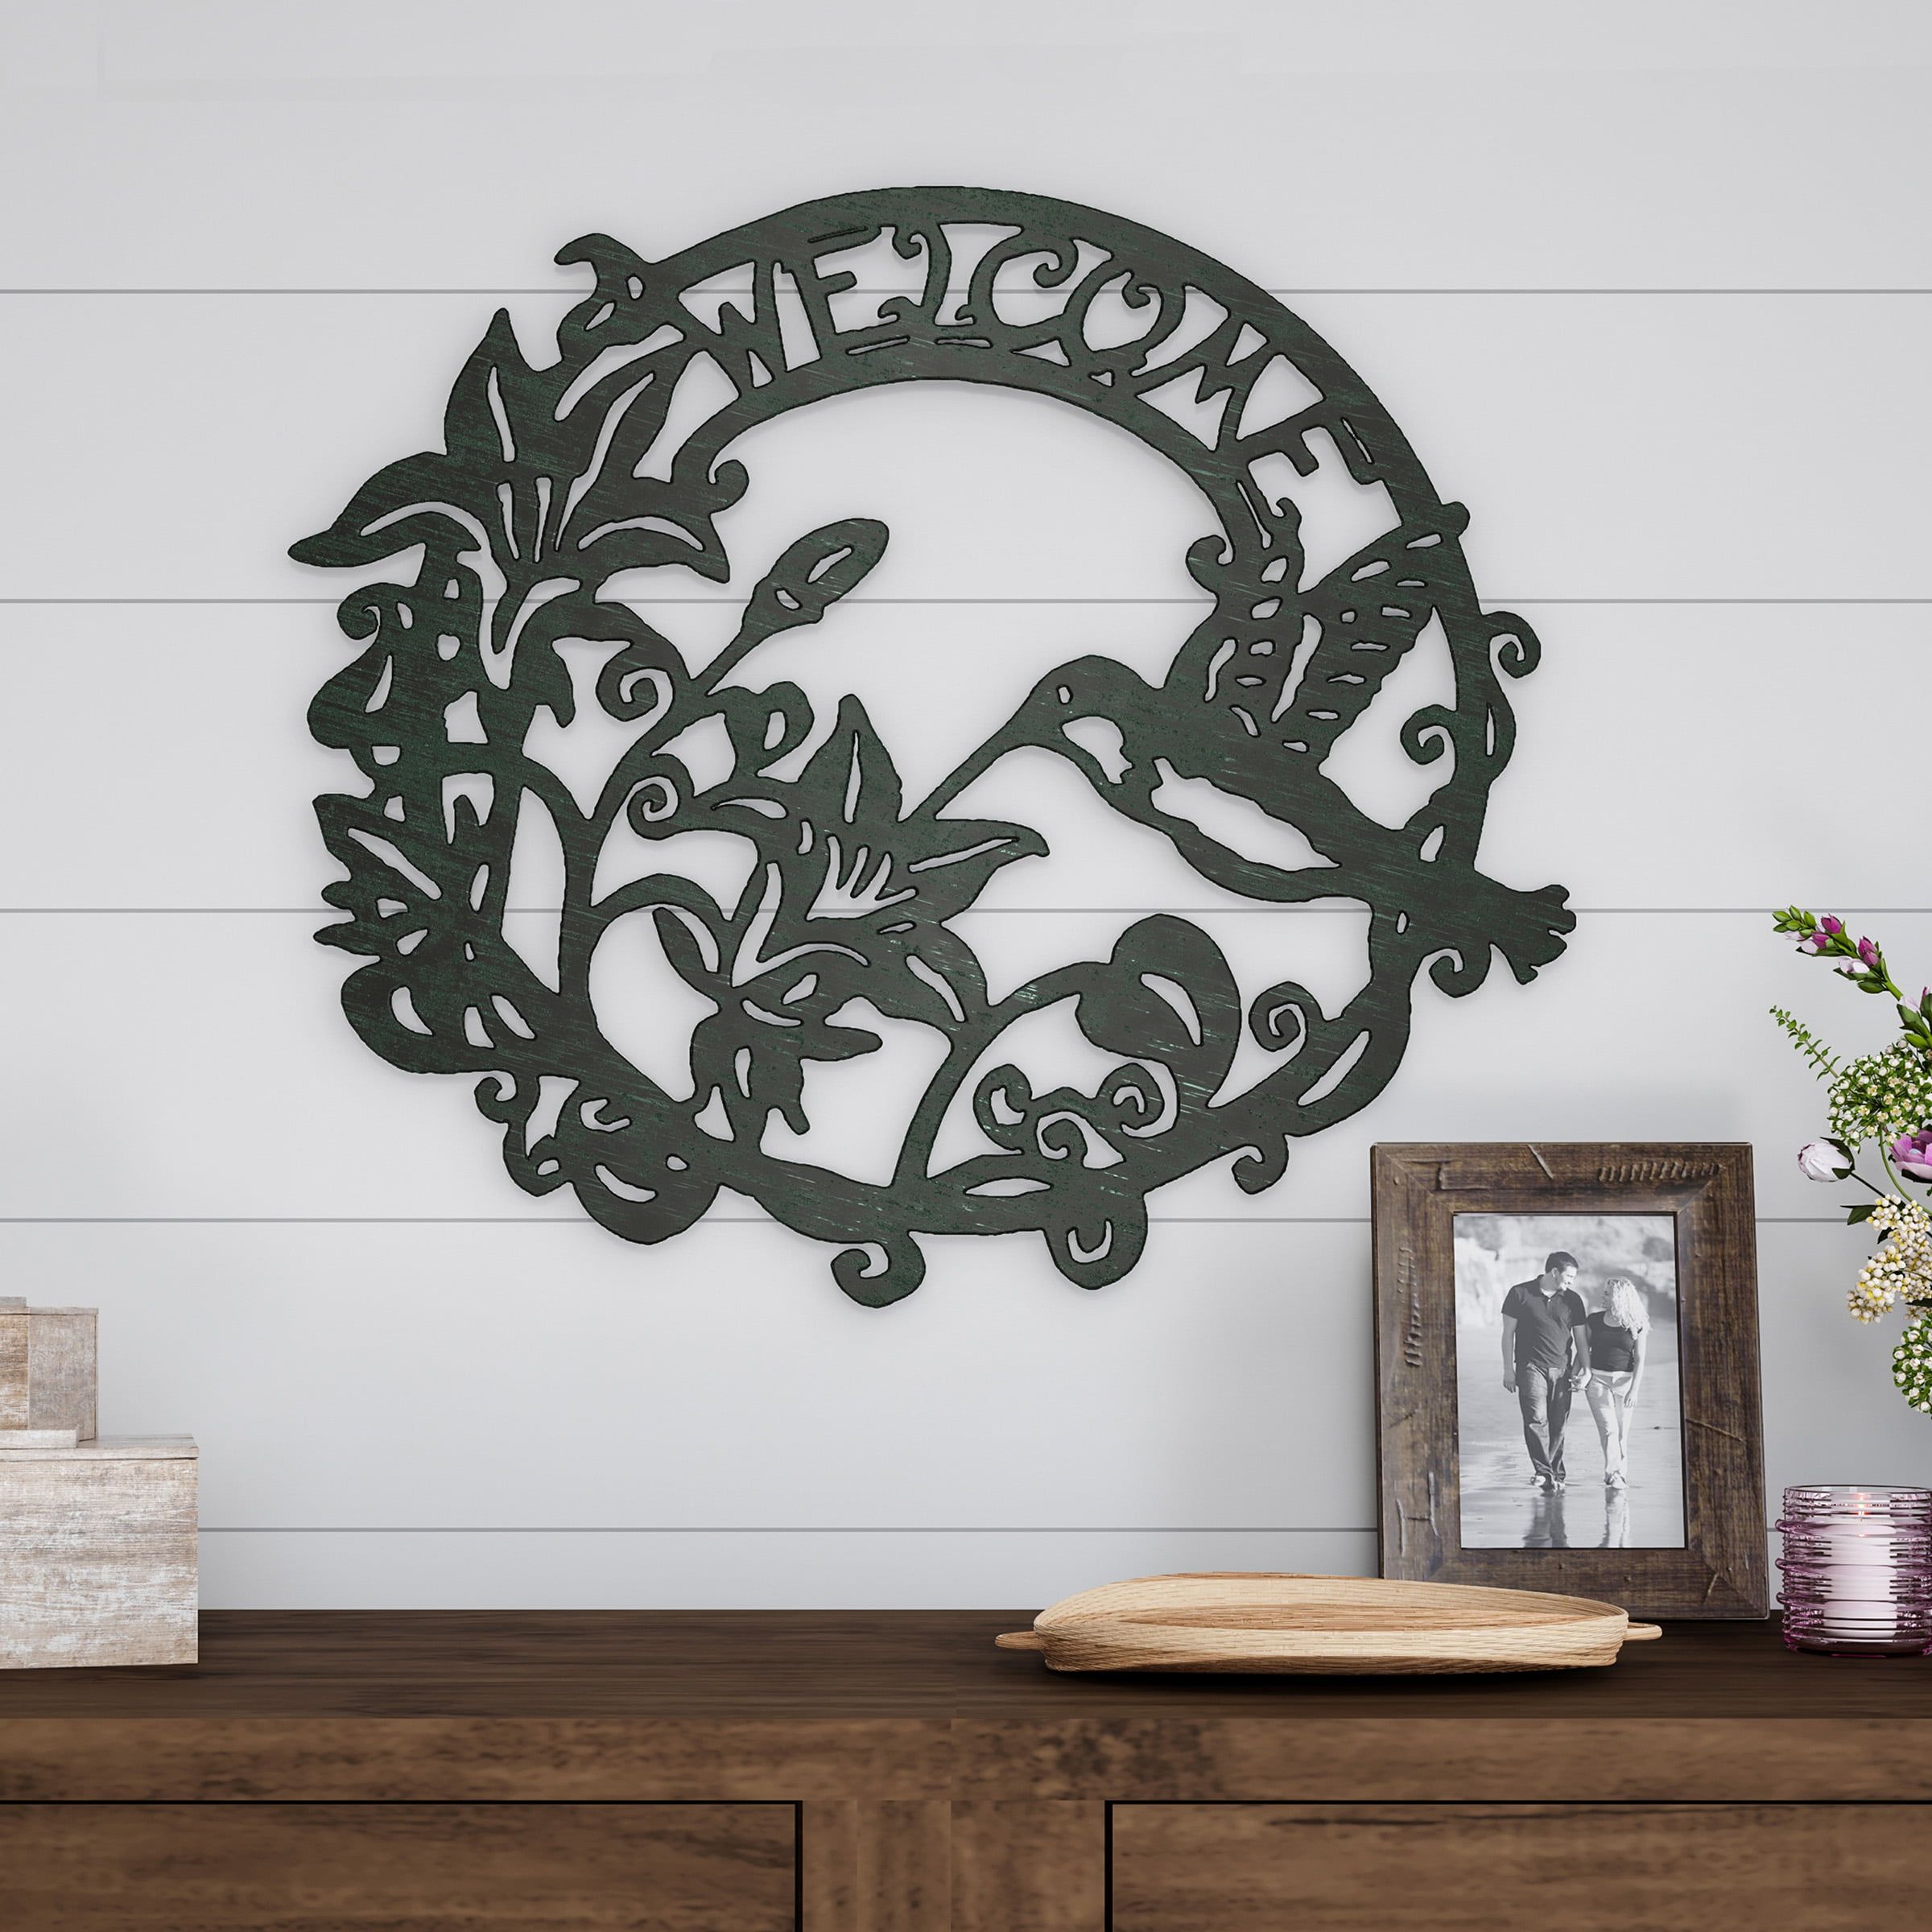 Metal Cutout  Welcome Decorative Wall Sign Wreath Word Art Home  Accent Perfect For Modern Rustic Or Vintage Farmhouse Stylelavish Home  – Walmart With Regard To Newest Vintage Metal Welcome Sign Wall Art (View 16 of 20)